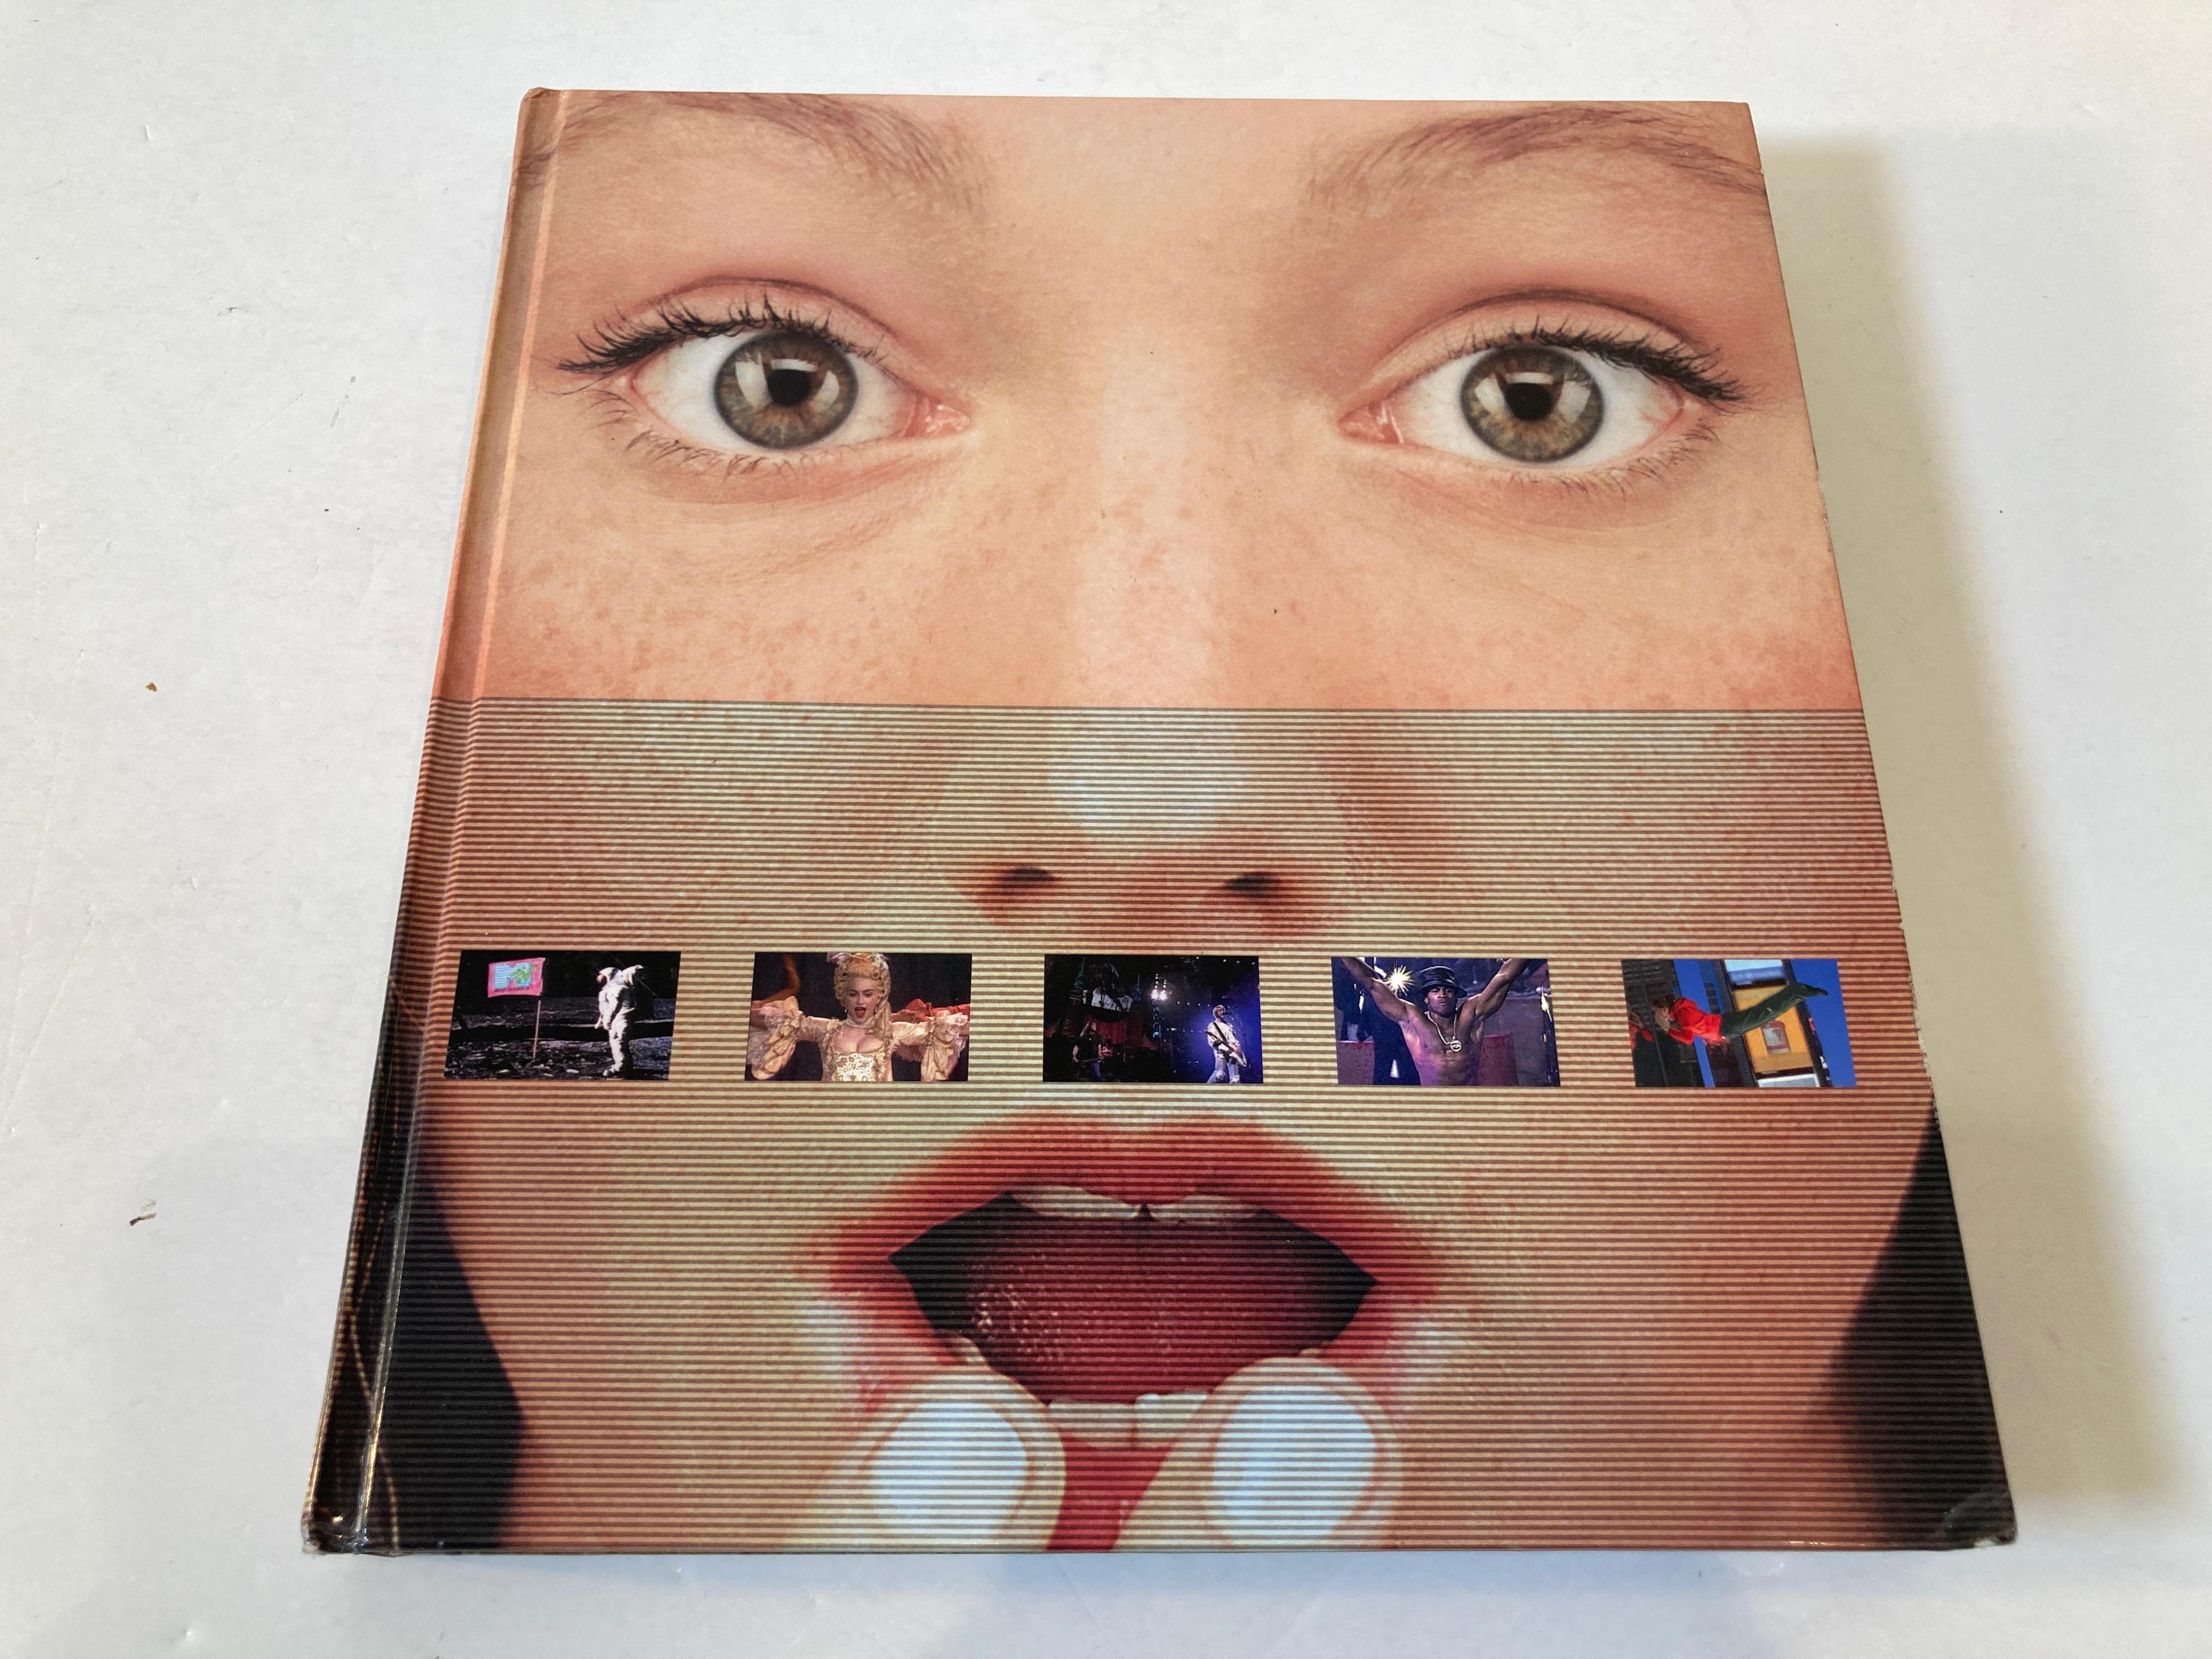 MTV Uncensored by MTV Staff 2001, Hardcover coffee table book.
Published by New York: Pocket Books, 2001. 1st ed. Hardcover. 288 pages. 2001
Synopsis:
Hundreds of color photos and conversations from several years of the Video Music